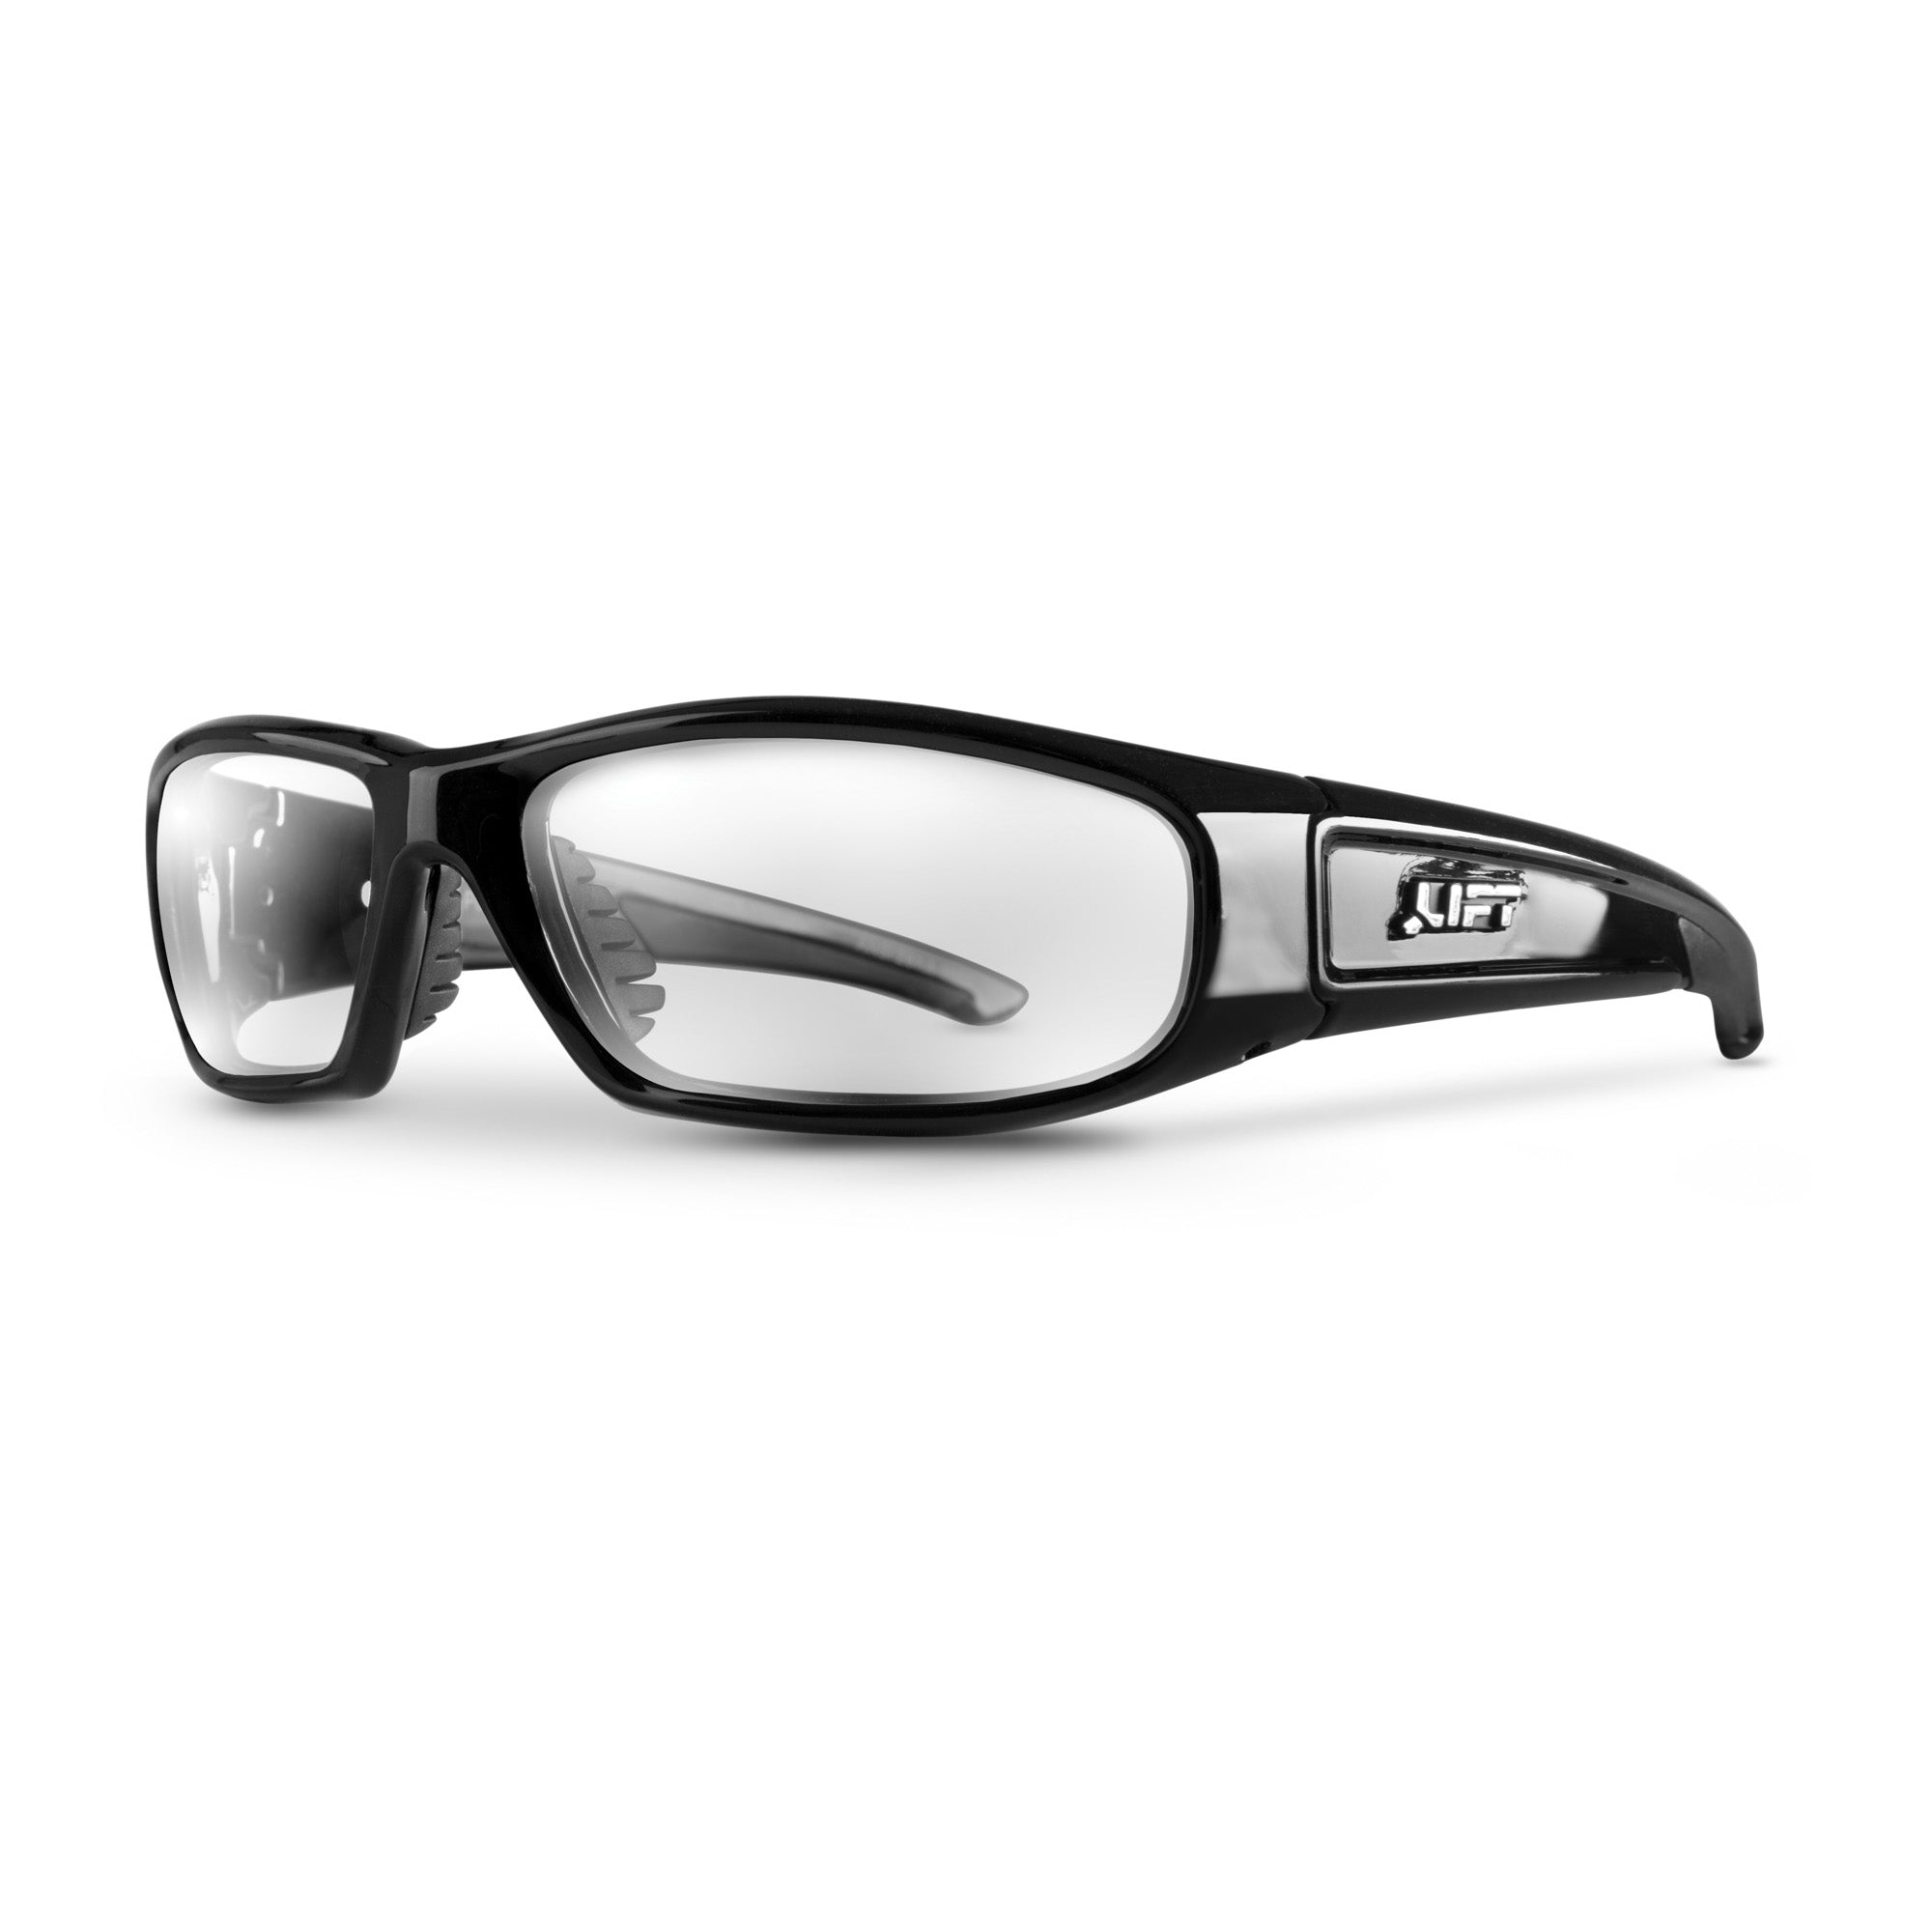 SWITCH Safety Glasses - BiFocal